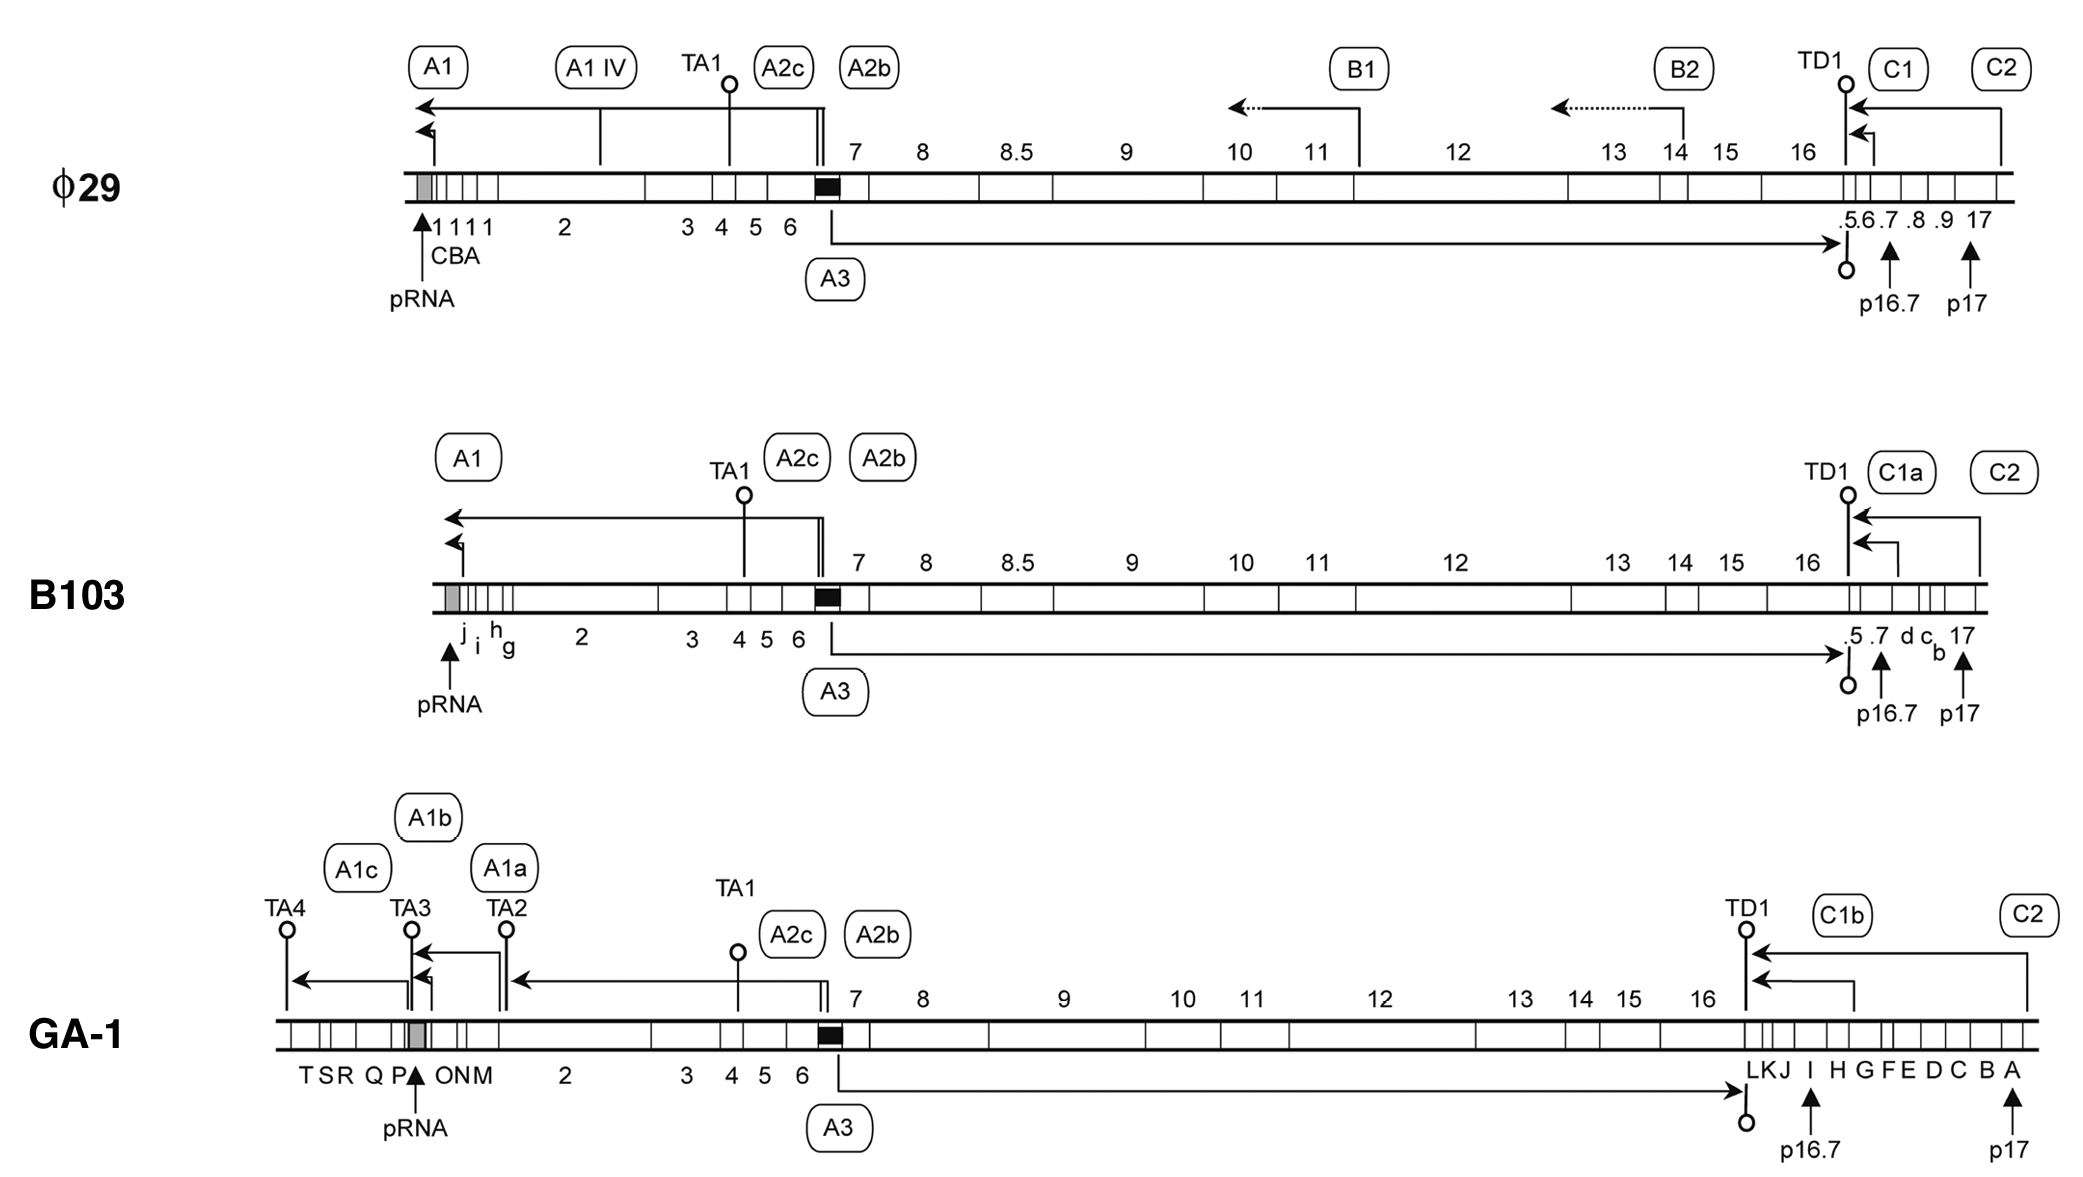 Figure 22-1: Genetic and transcriptional maps of phi29, B103 and GA-1 DNA. The maps are aligned with respect to the A2c, A2b and A3 promoters. The direction of transcription and length of the transcripts are indicated by arrows. The positions of genes 16.7 and 17 are indicated. ORFs 16.9, 16.8, 16.6 and 16.5 are indicated by the numbers .9, .8, .6 and .5, respectively. Transcriptional terminators are indicated by stem-loop structures. The grey box indicates the DNA region encoding the pRNA, and the black box indicates the region containing the early promoters A2c and A2b, and the late promoter A3. The figure is adapted from Meijer et al. (90). 